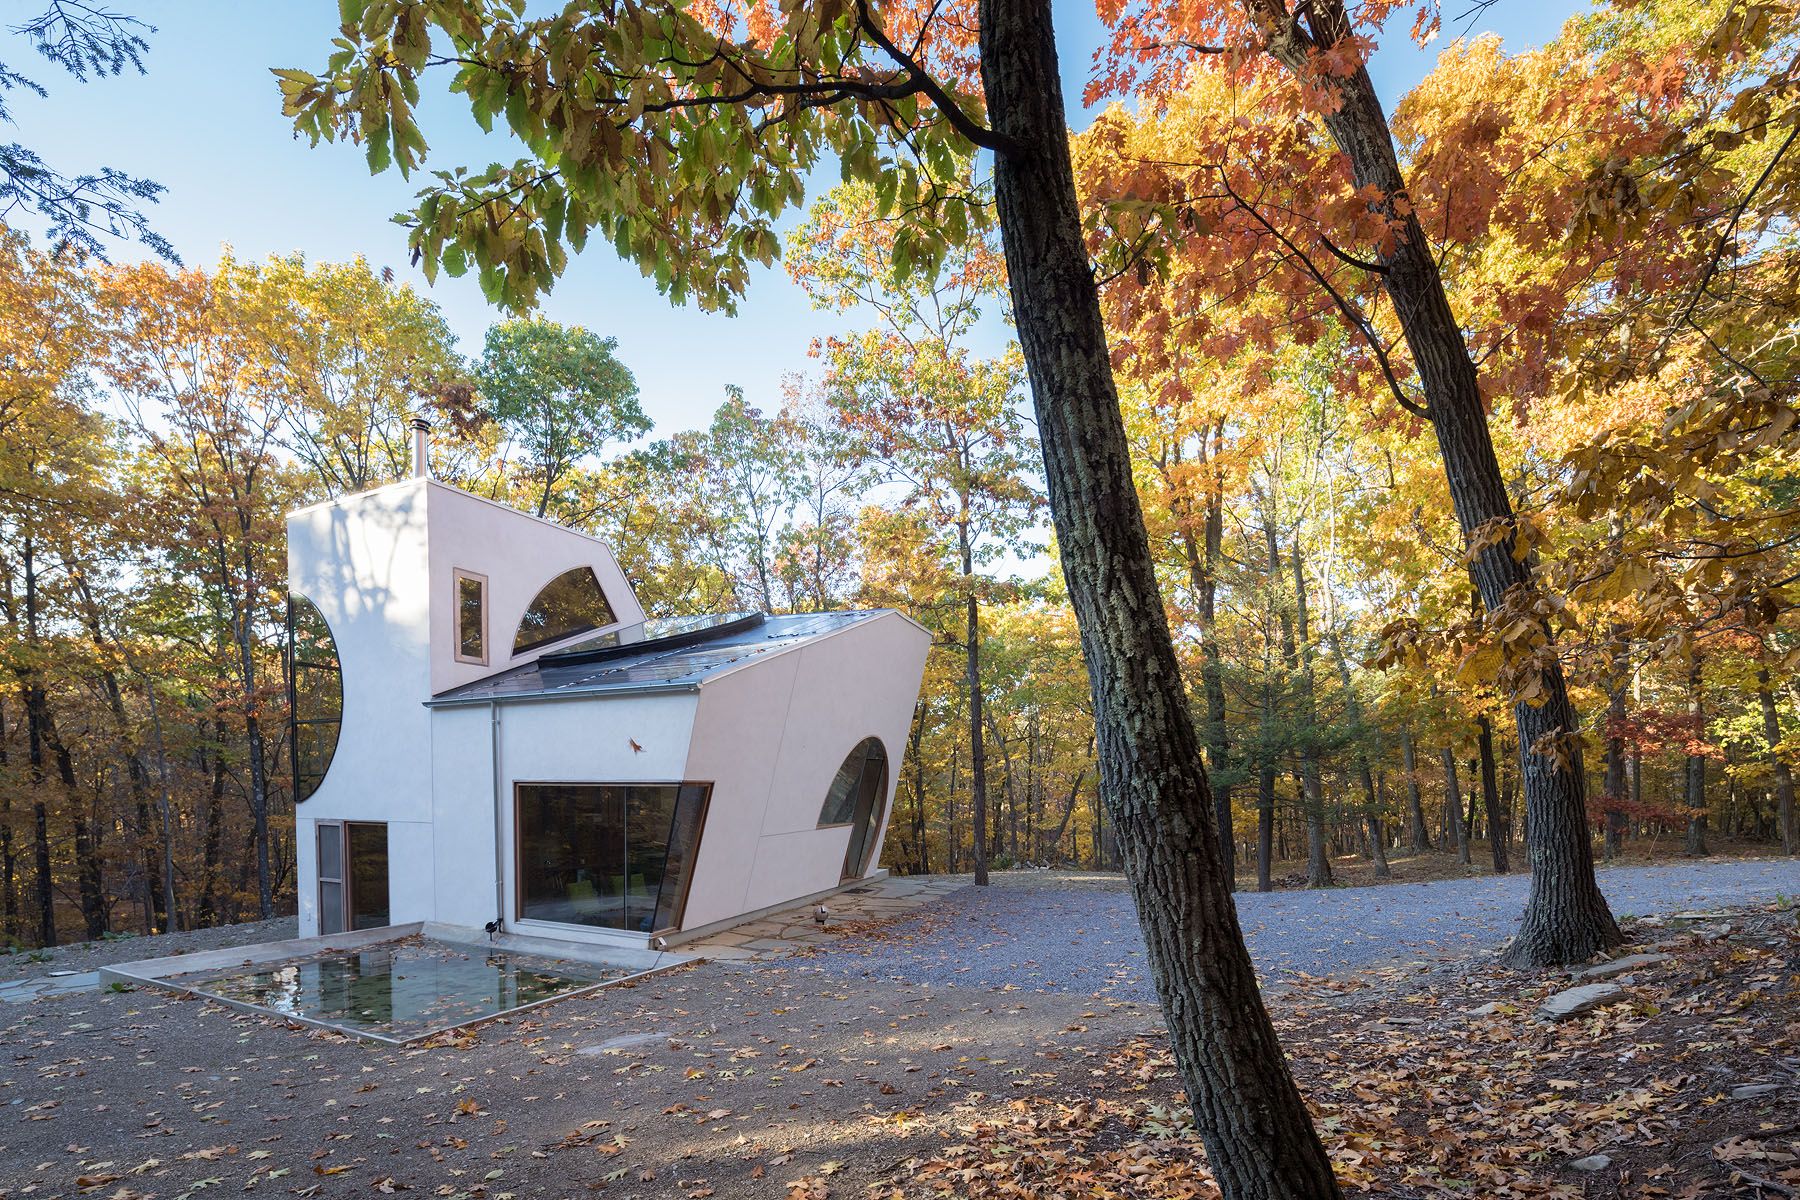 Ex of In house, Rhinebeck, NY – Steven Holl